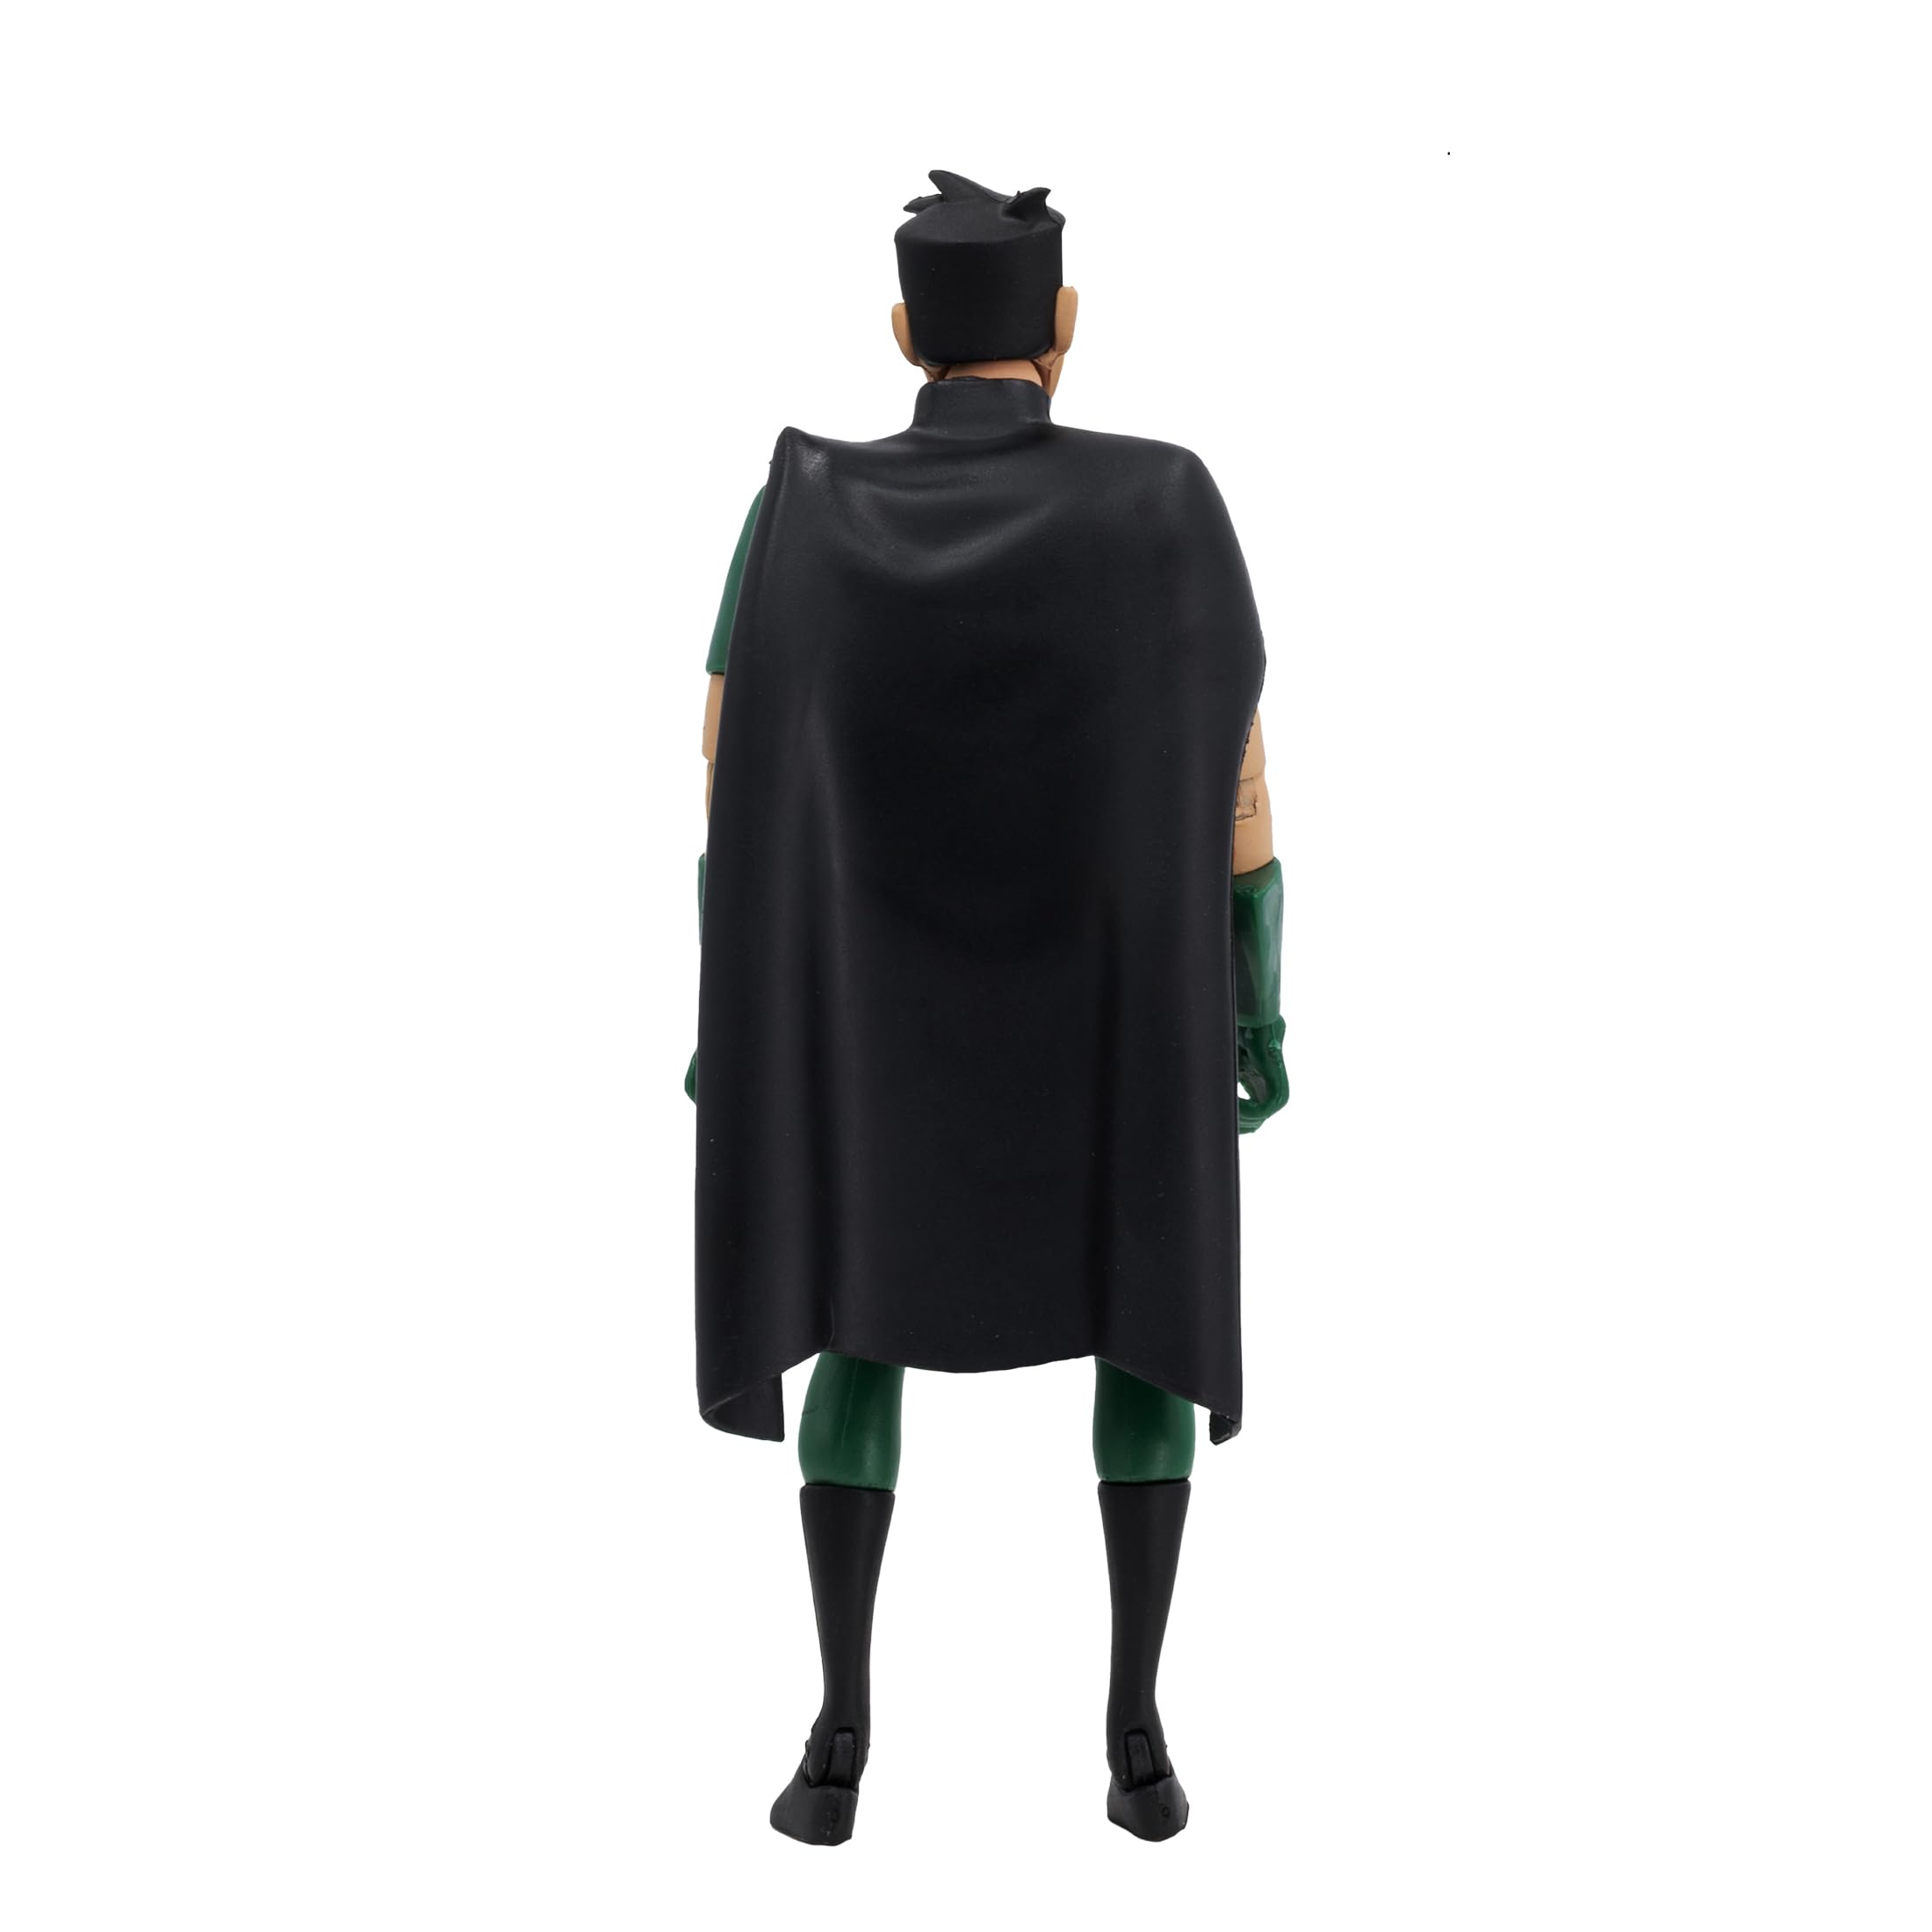 DC Direct Batman The Animated Series 6 Inch Action Figure Wave 1 - Robin